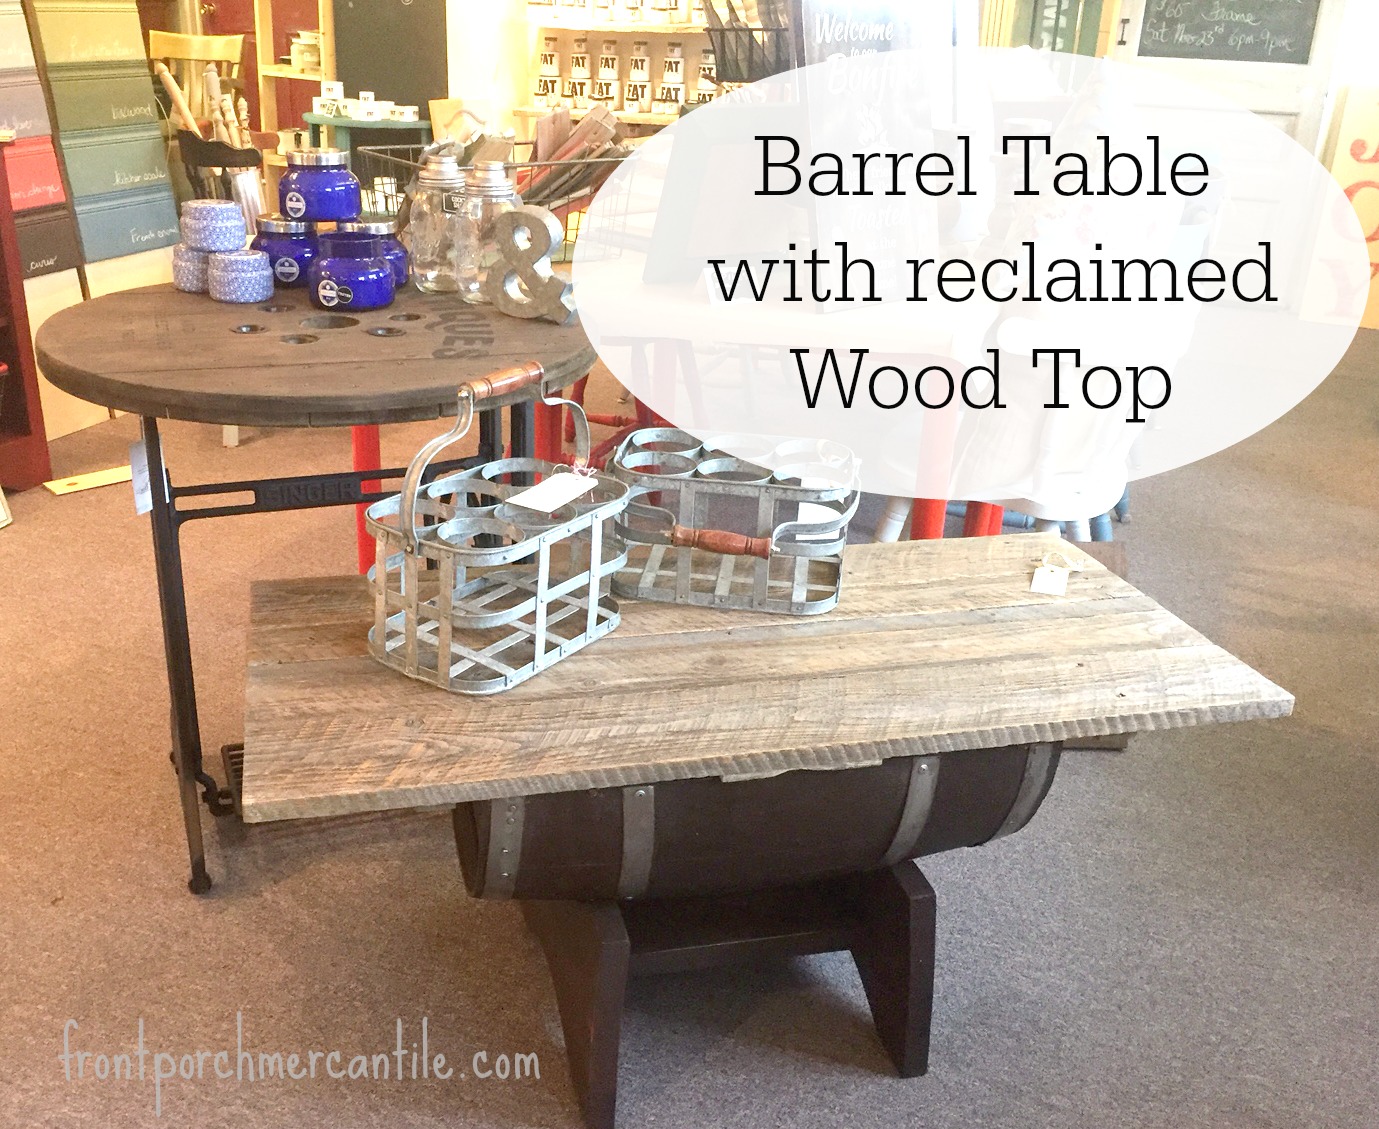 Barrel Tables from Front Porch Mercantile